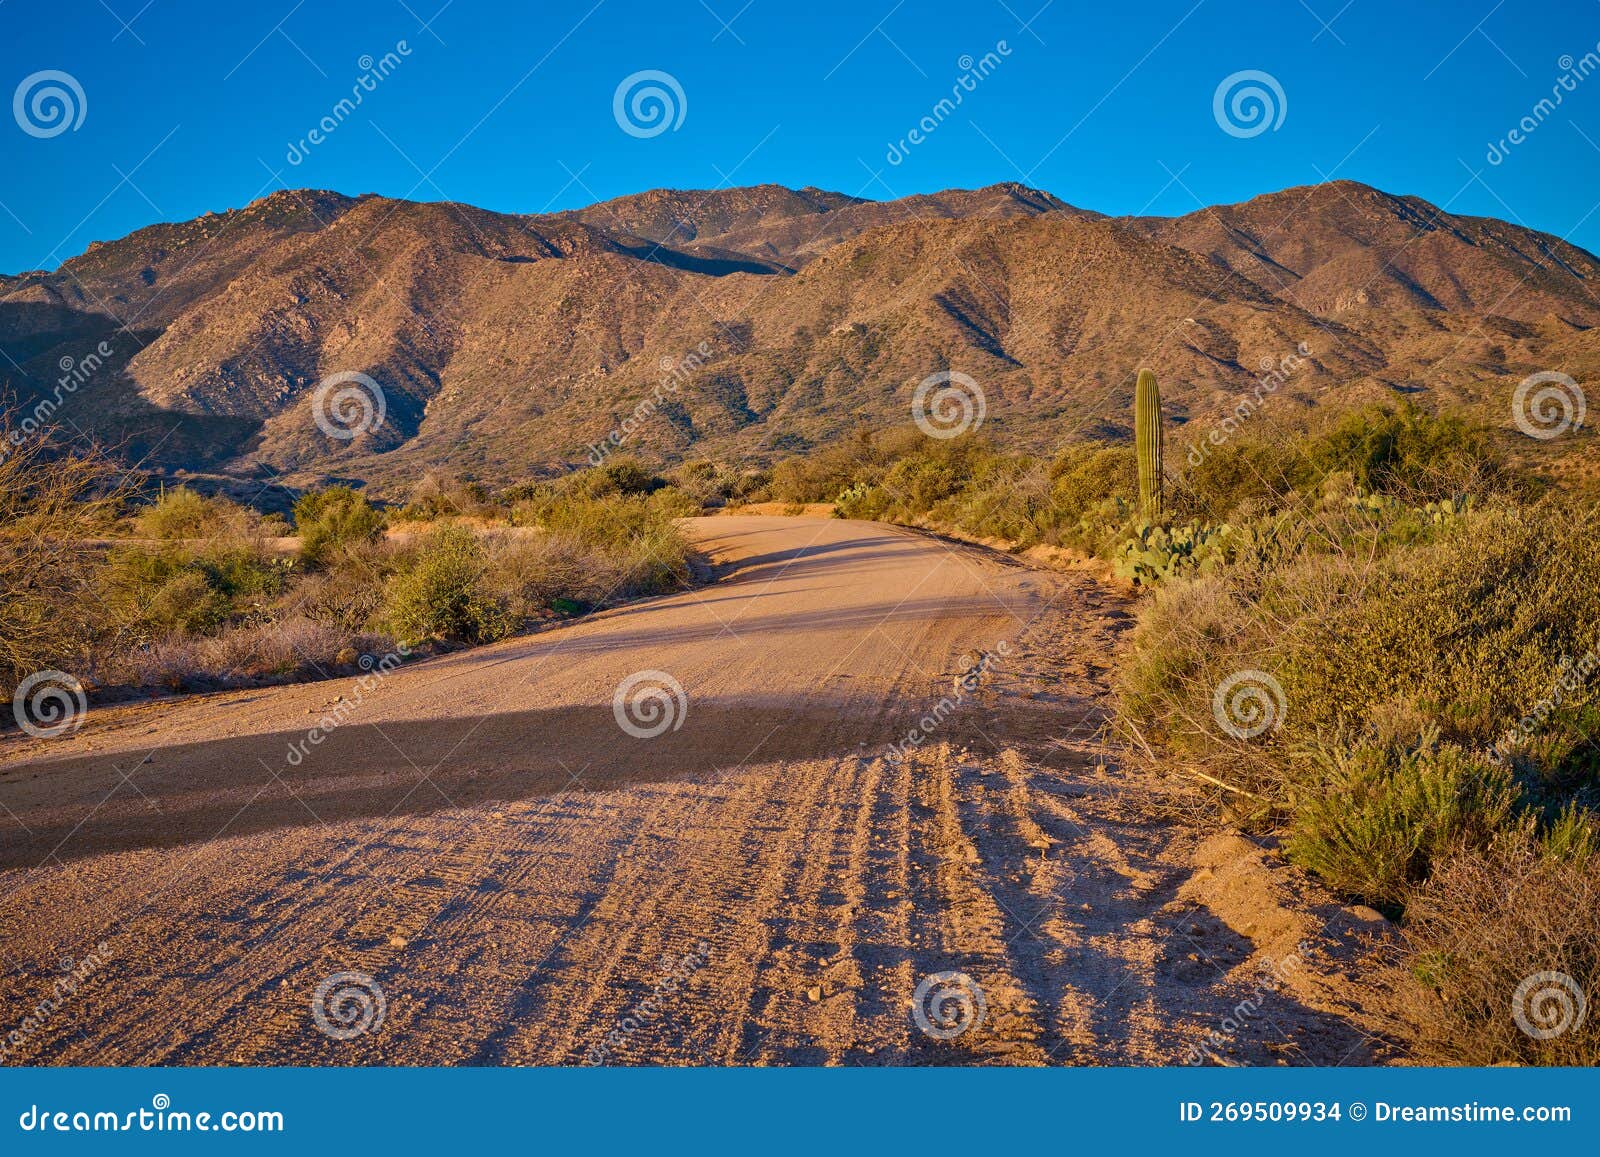 el oso road with warm morning light on the mountains in the background